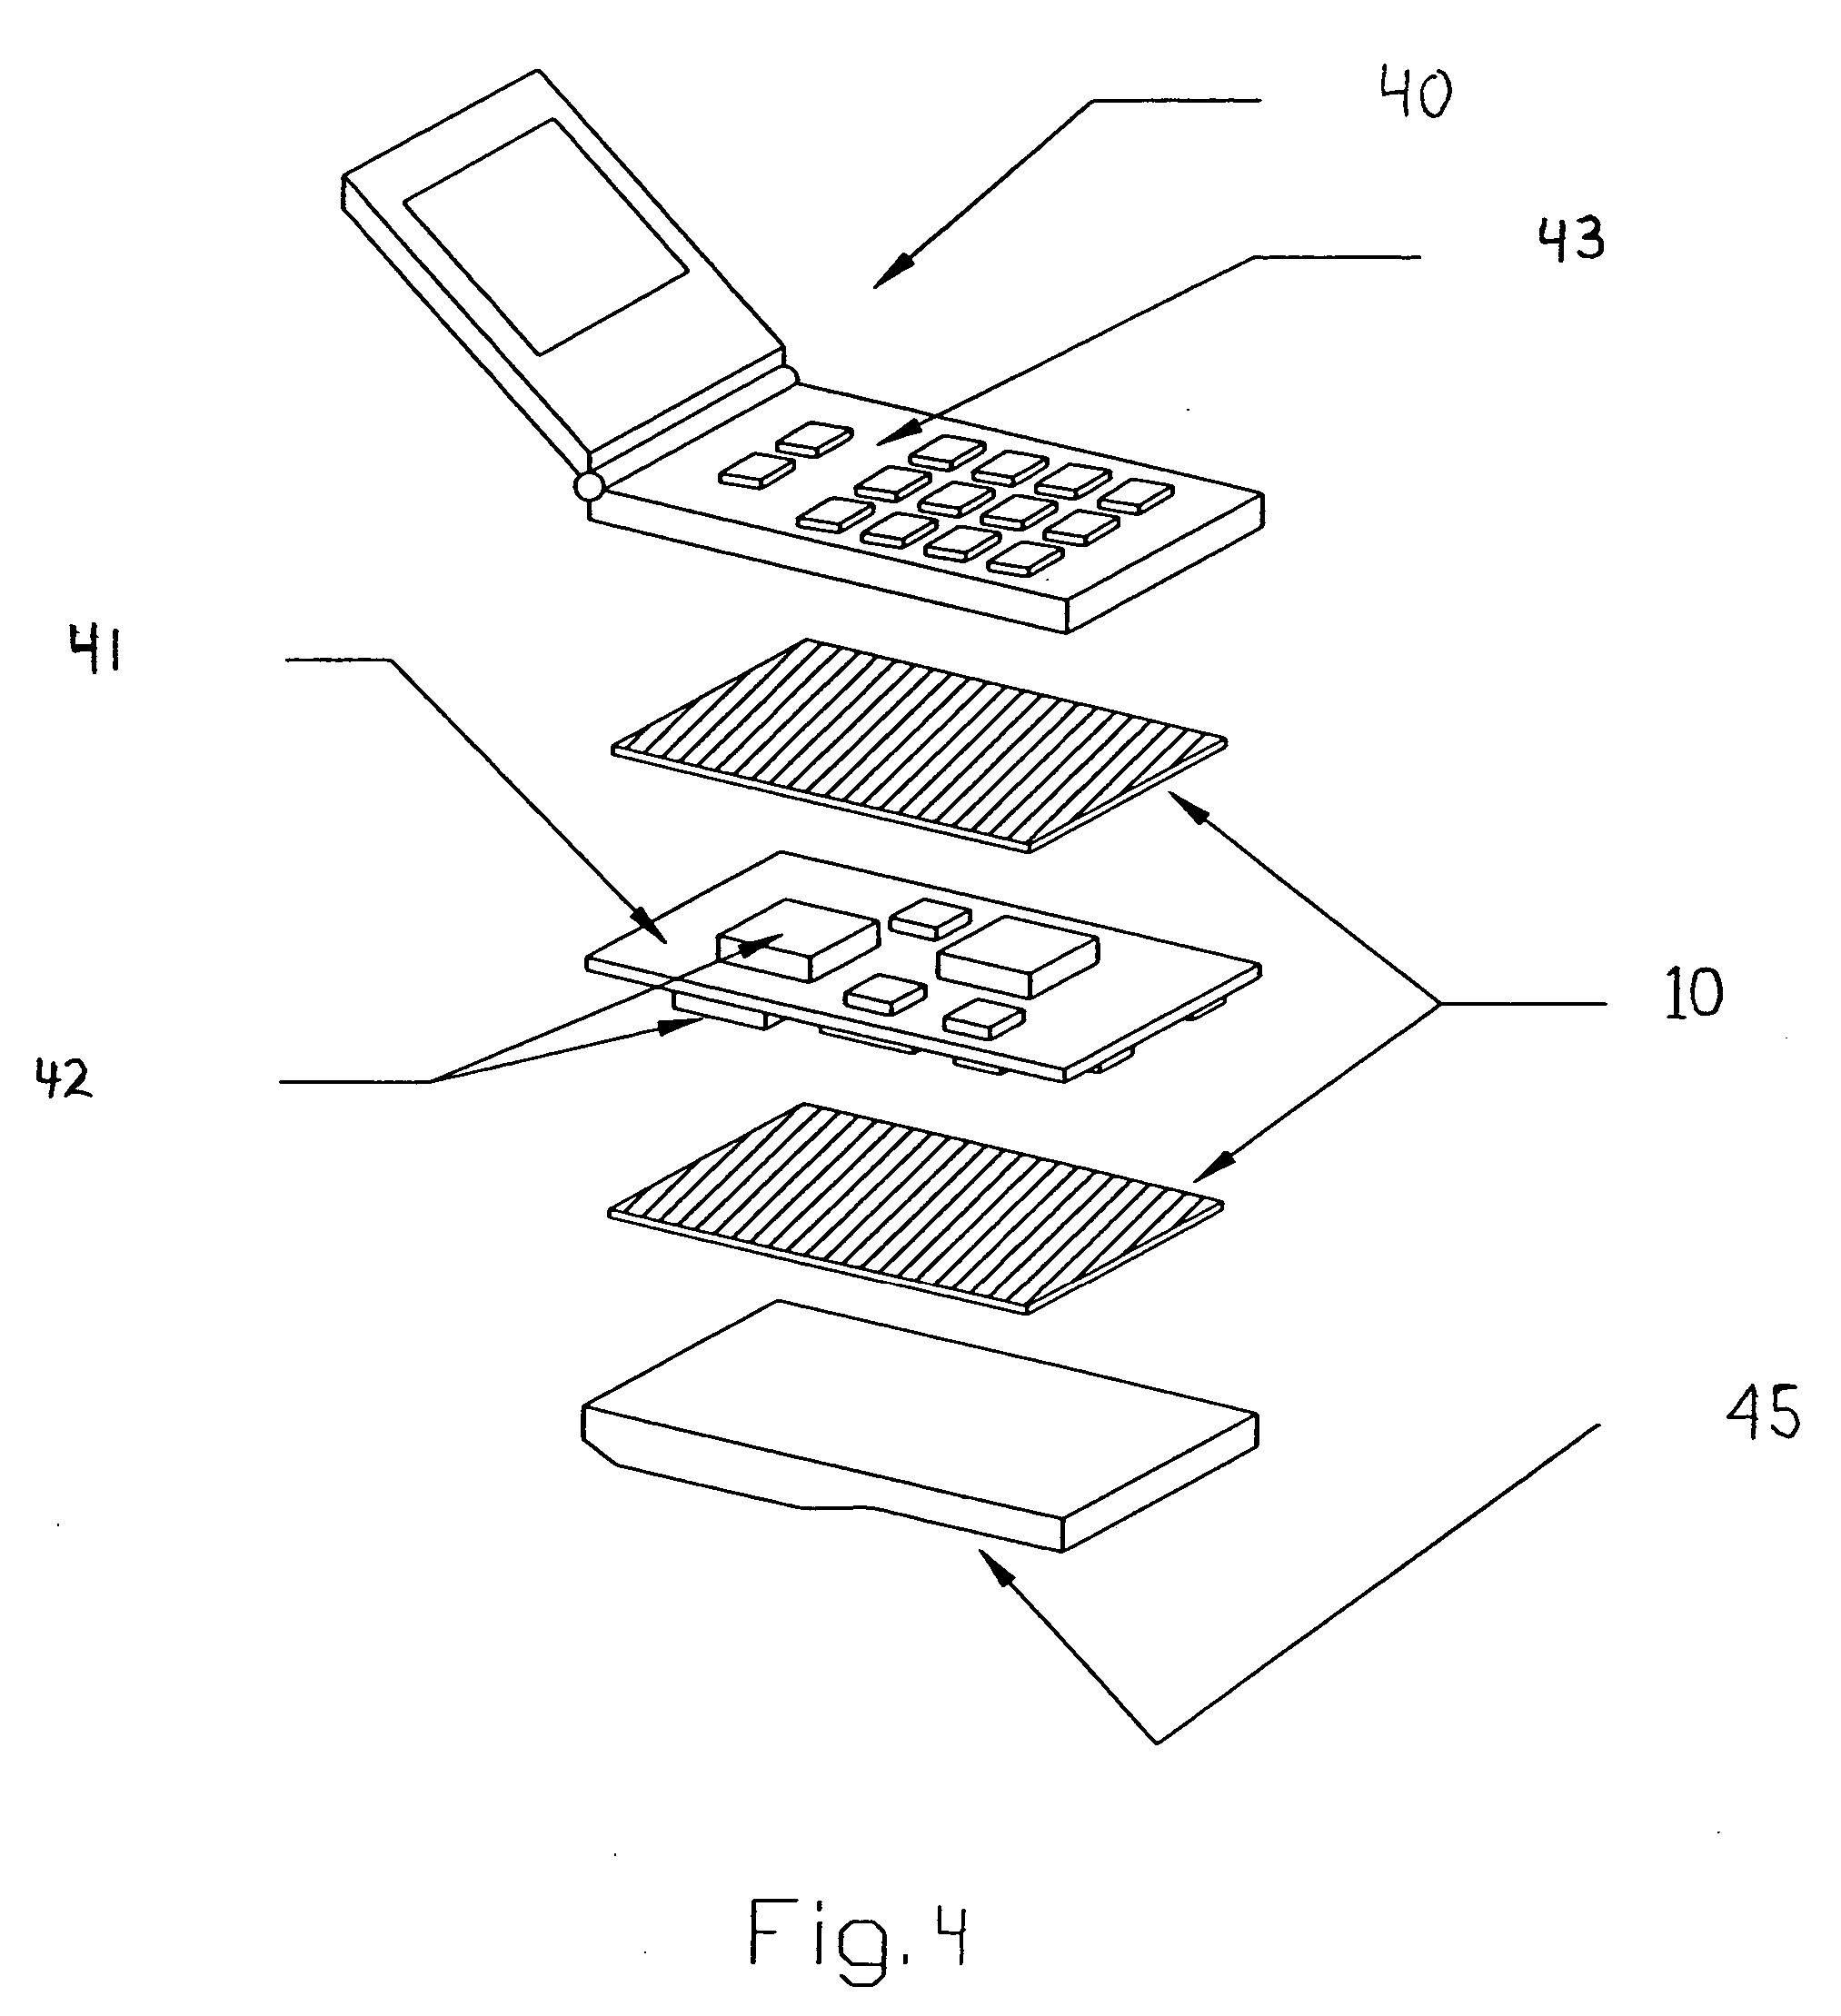 Insulating structure having combined insulating and heat spreading capabilities